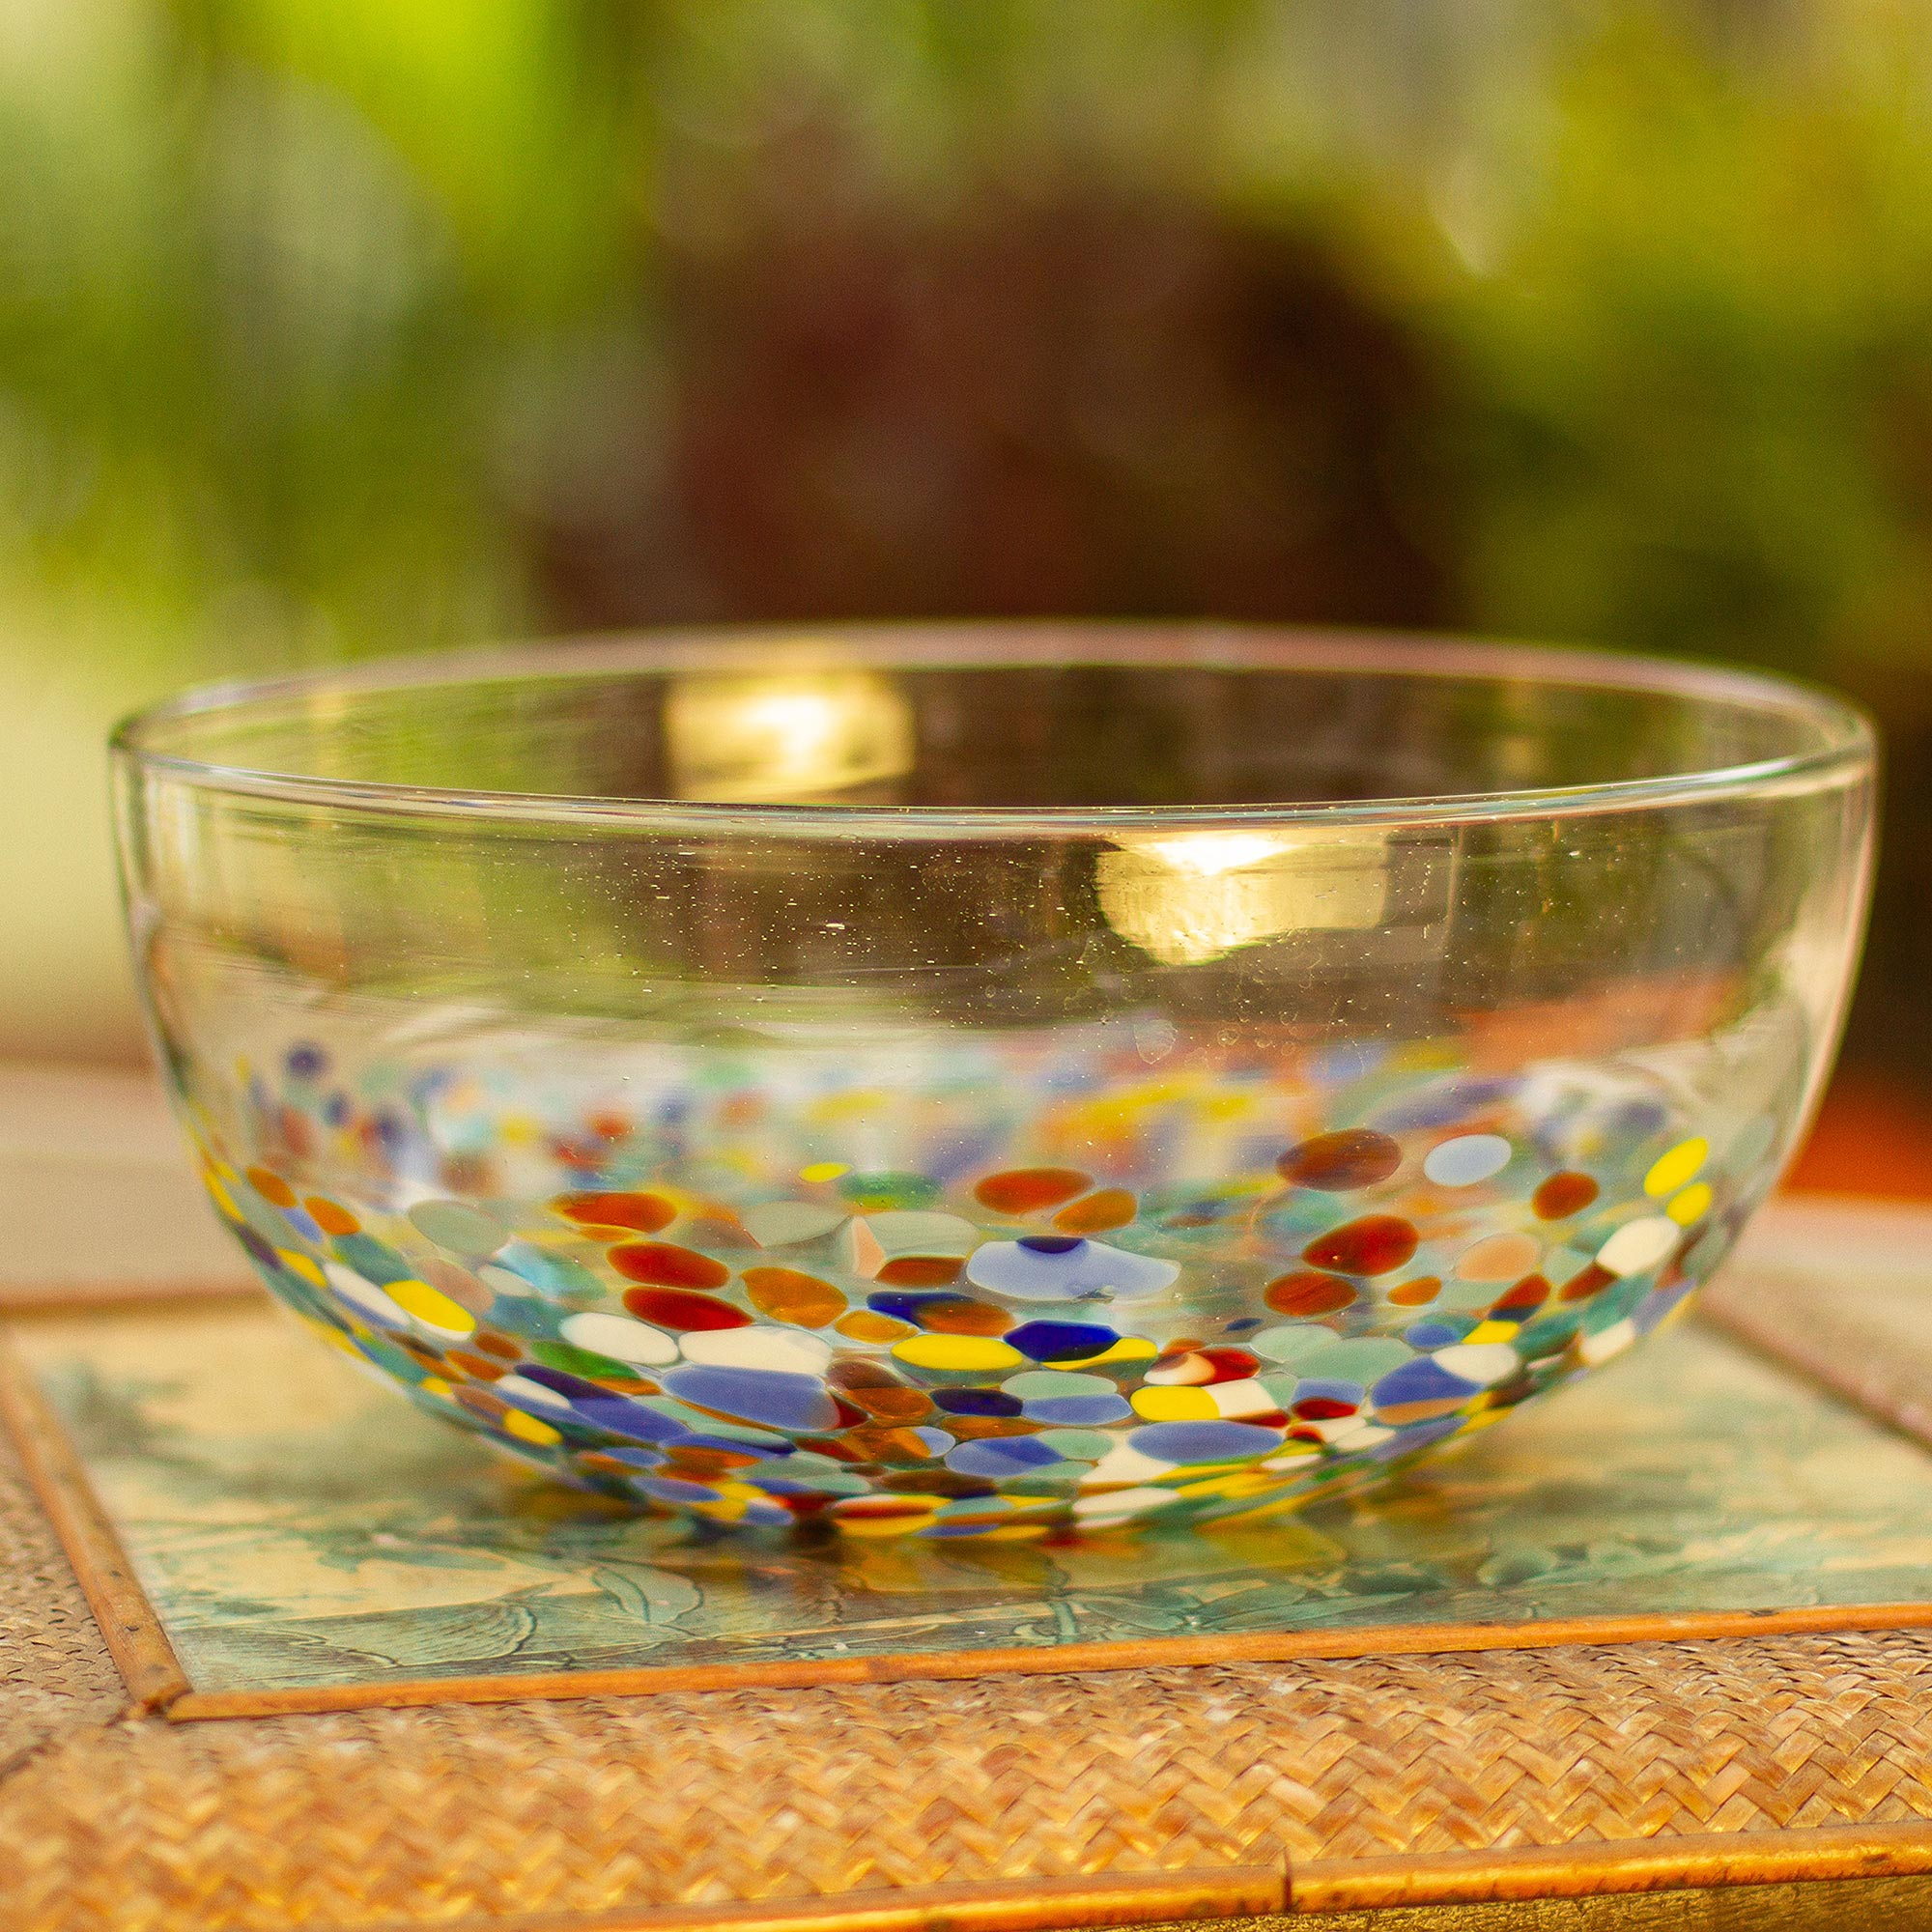 Salad Bowl Big - La Soufflerie - Hand blown from recycled glass